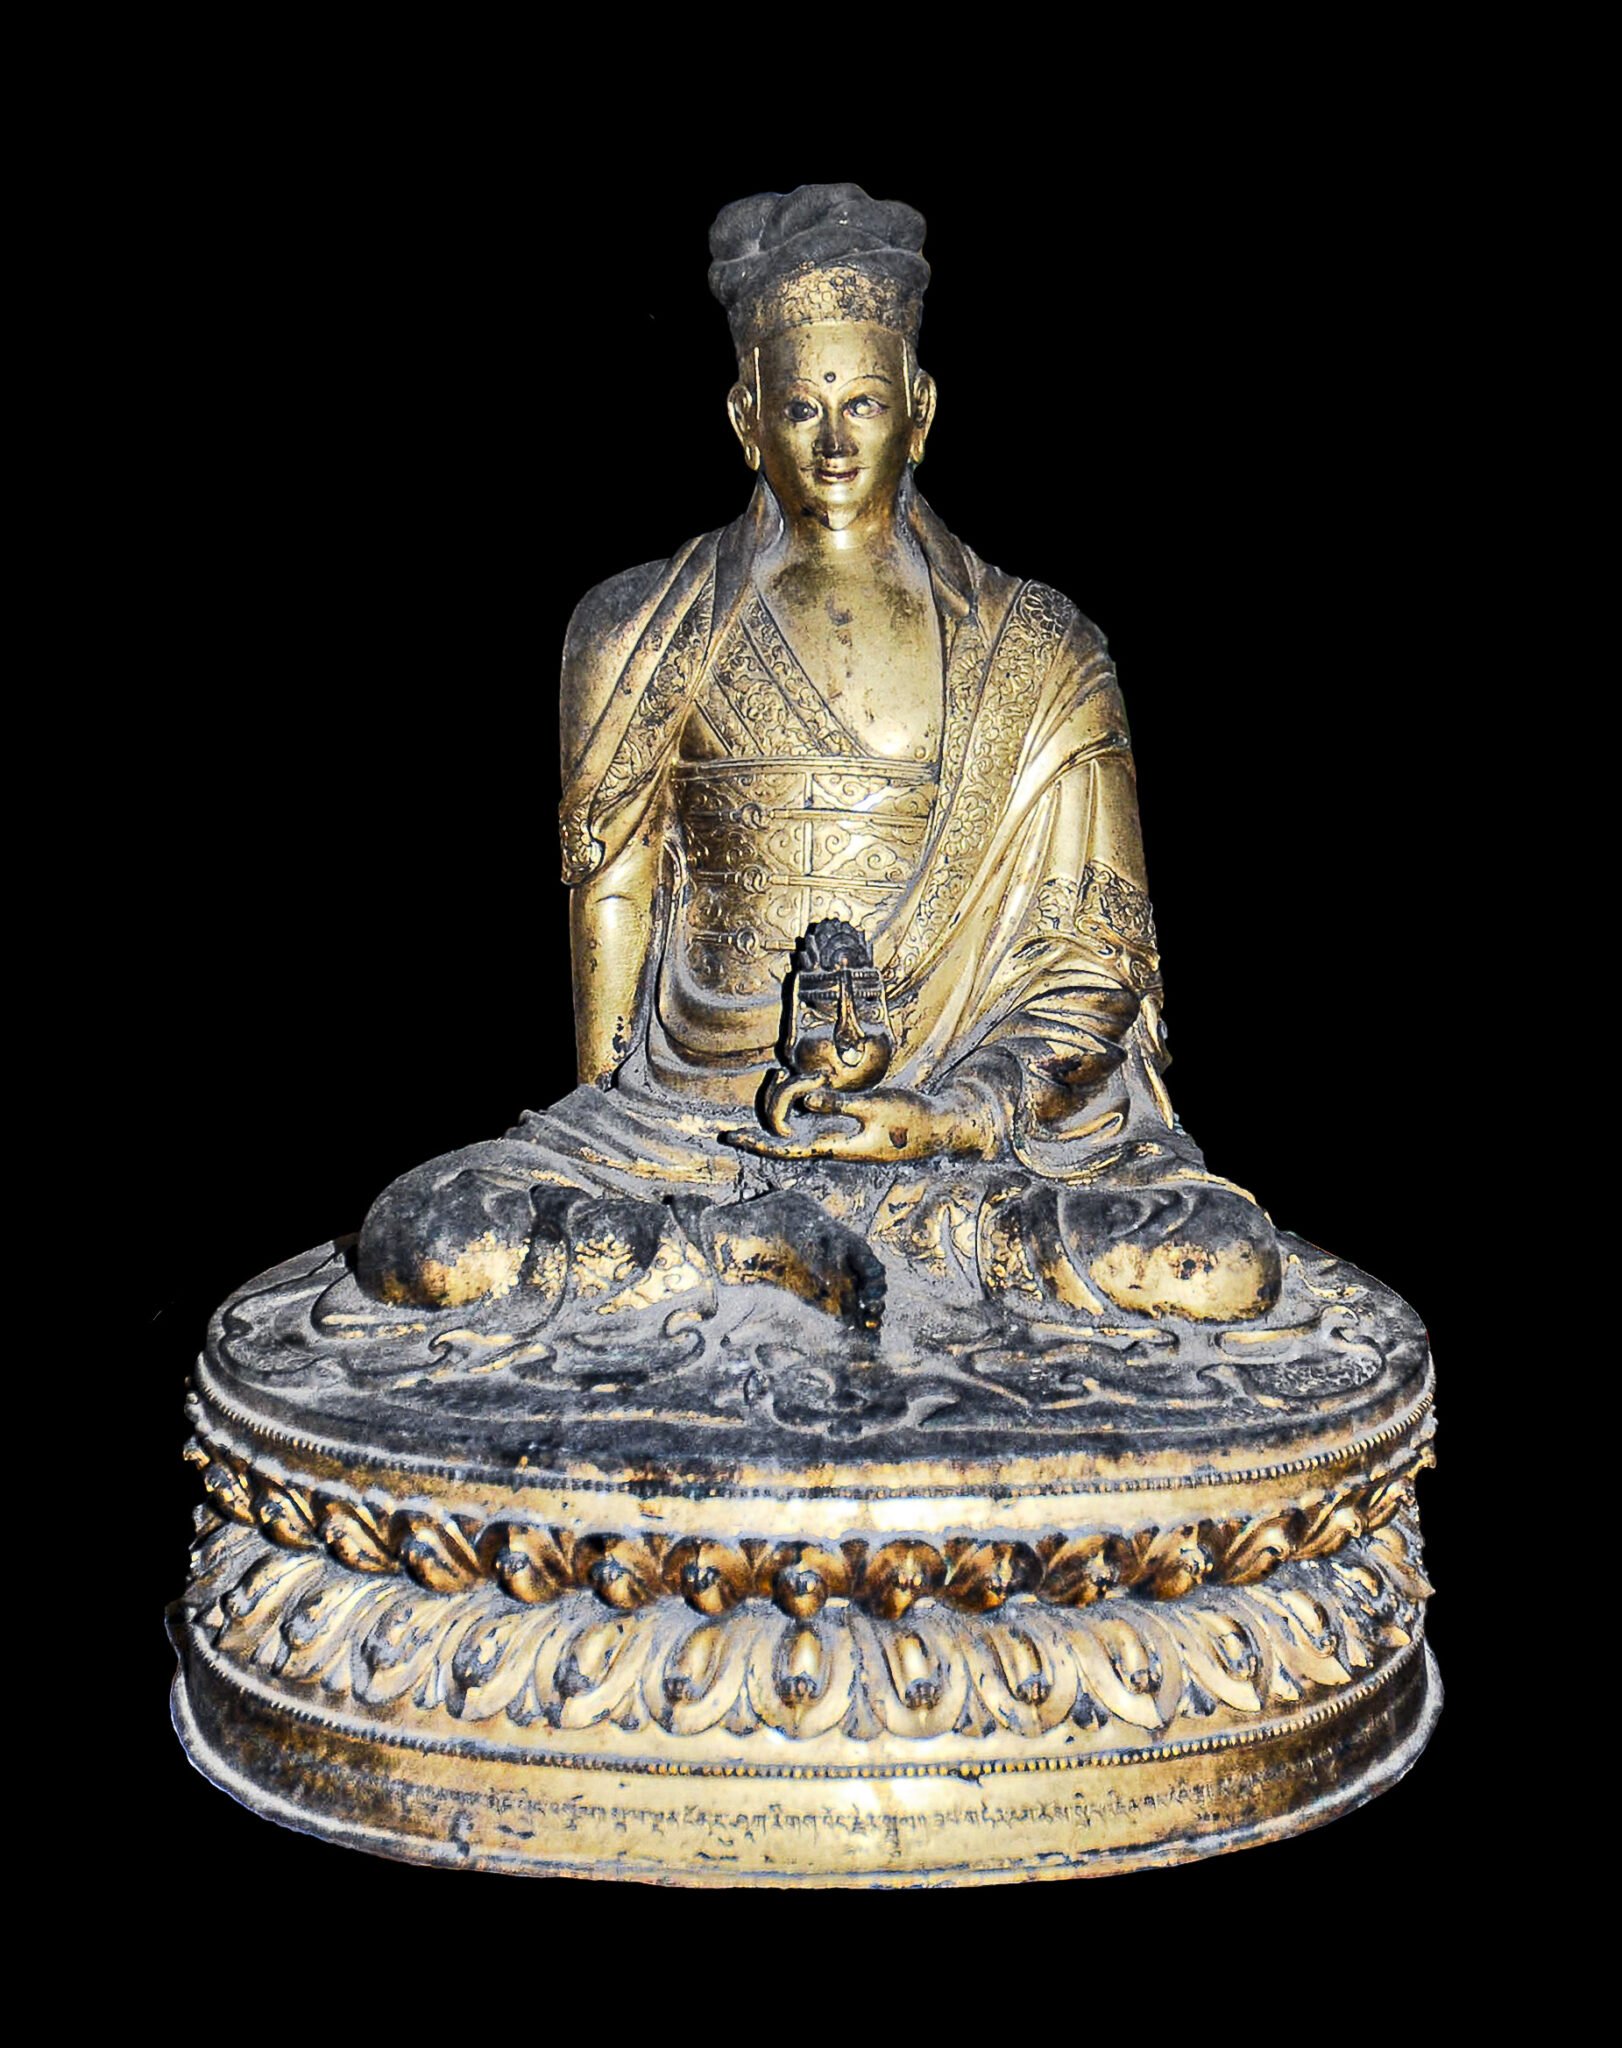 Tarnished golden statue depicting seated Siddha wearing gossamer robe holding implement in right hand